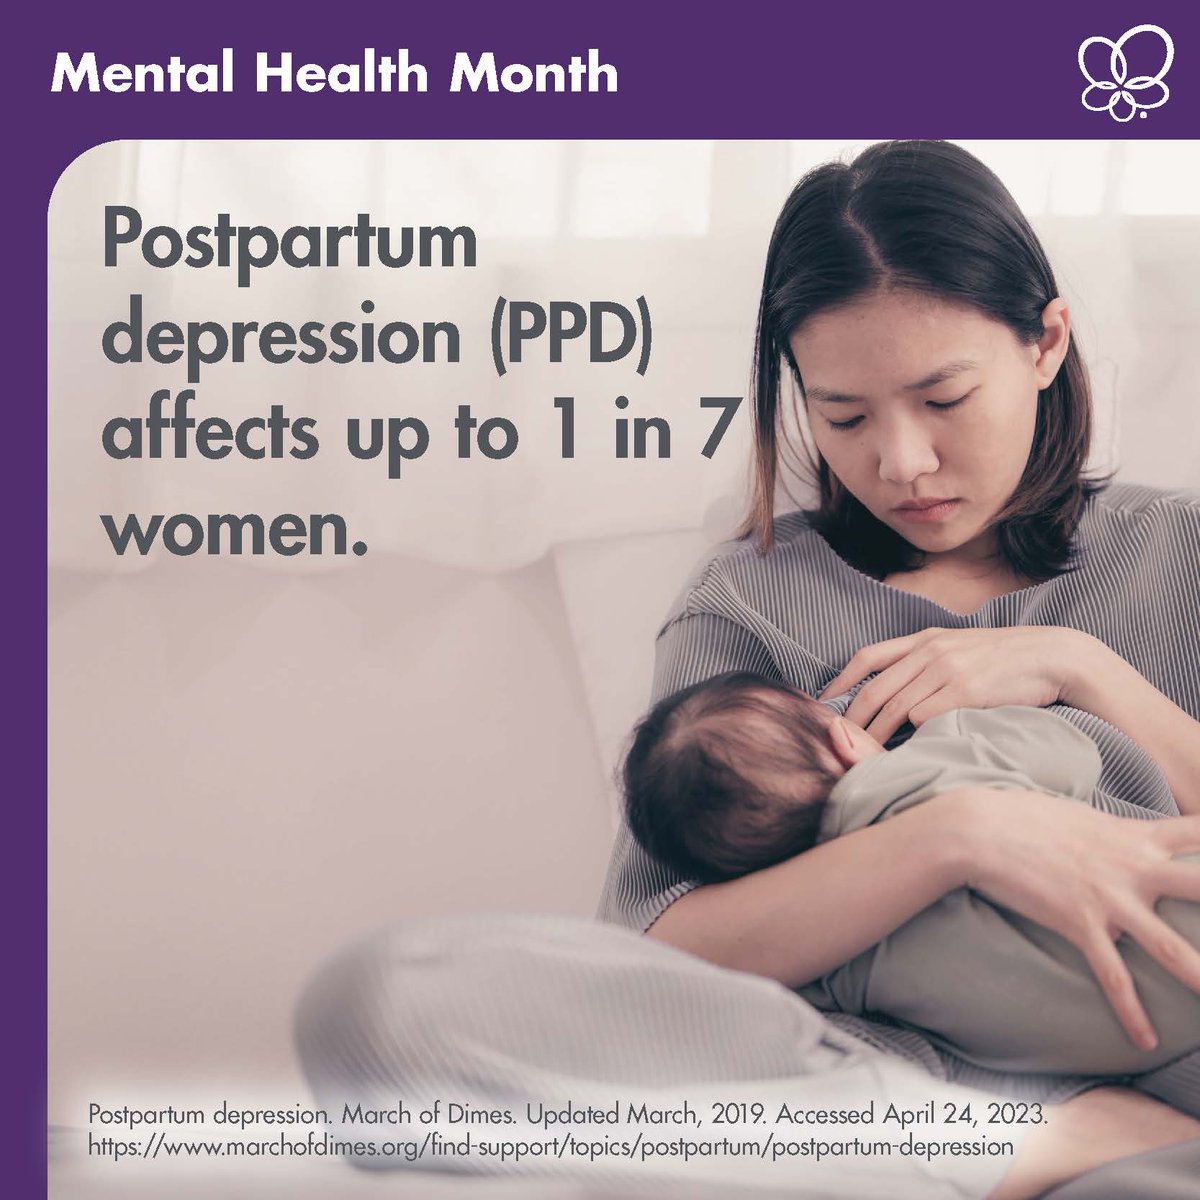 If you feel you are experiencing changes in your #mentalhealth before or after the #birth of your #baby, schedule time to speak with your #healthcareprovider or a #mentalhealthprofessional. #MentalHealthAwarenessMonth